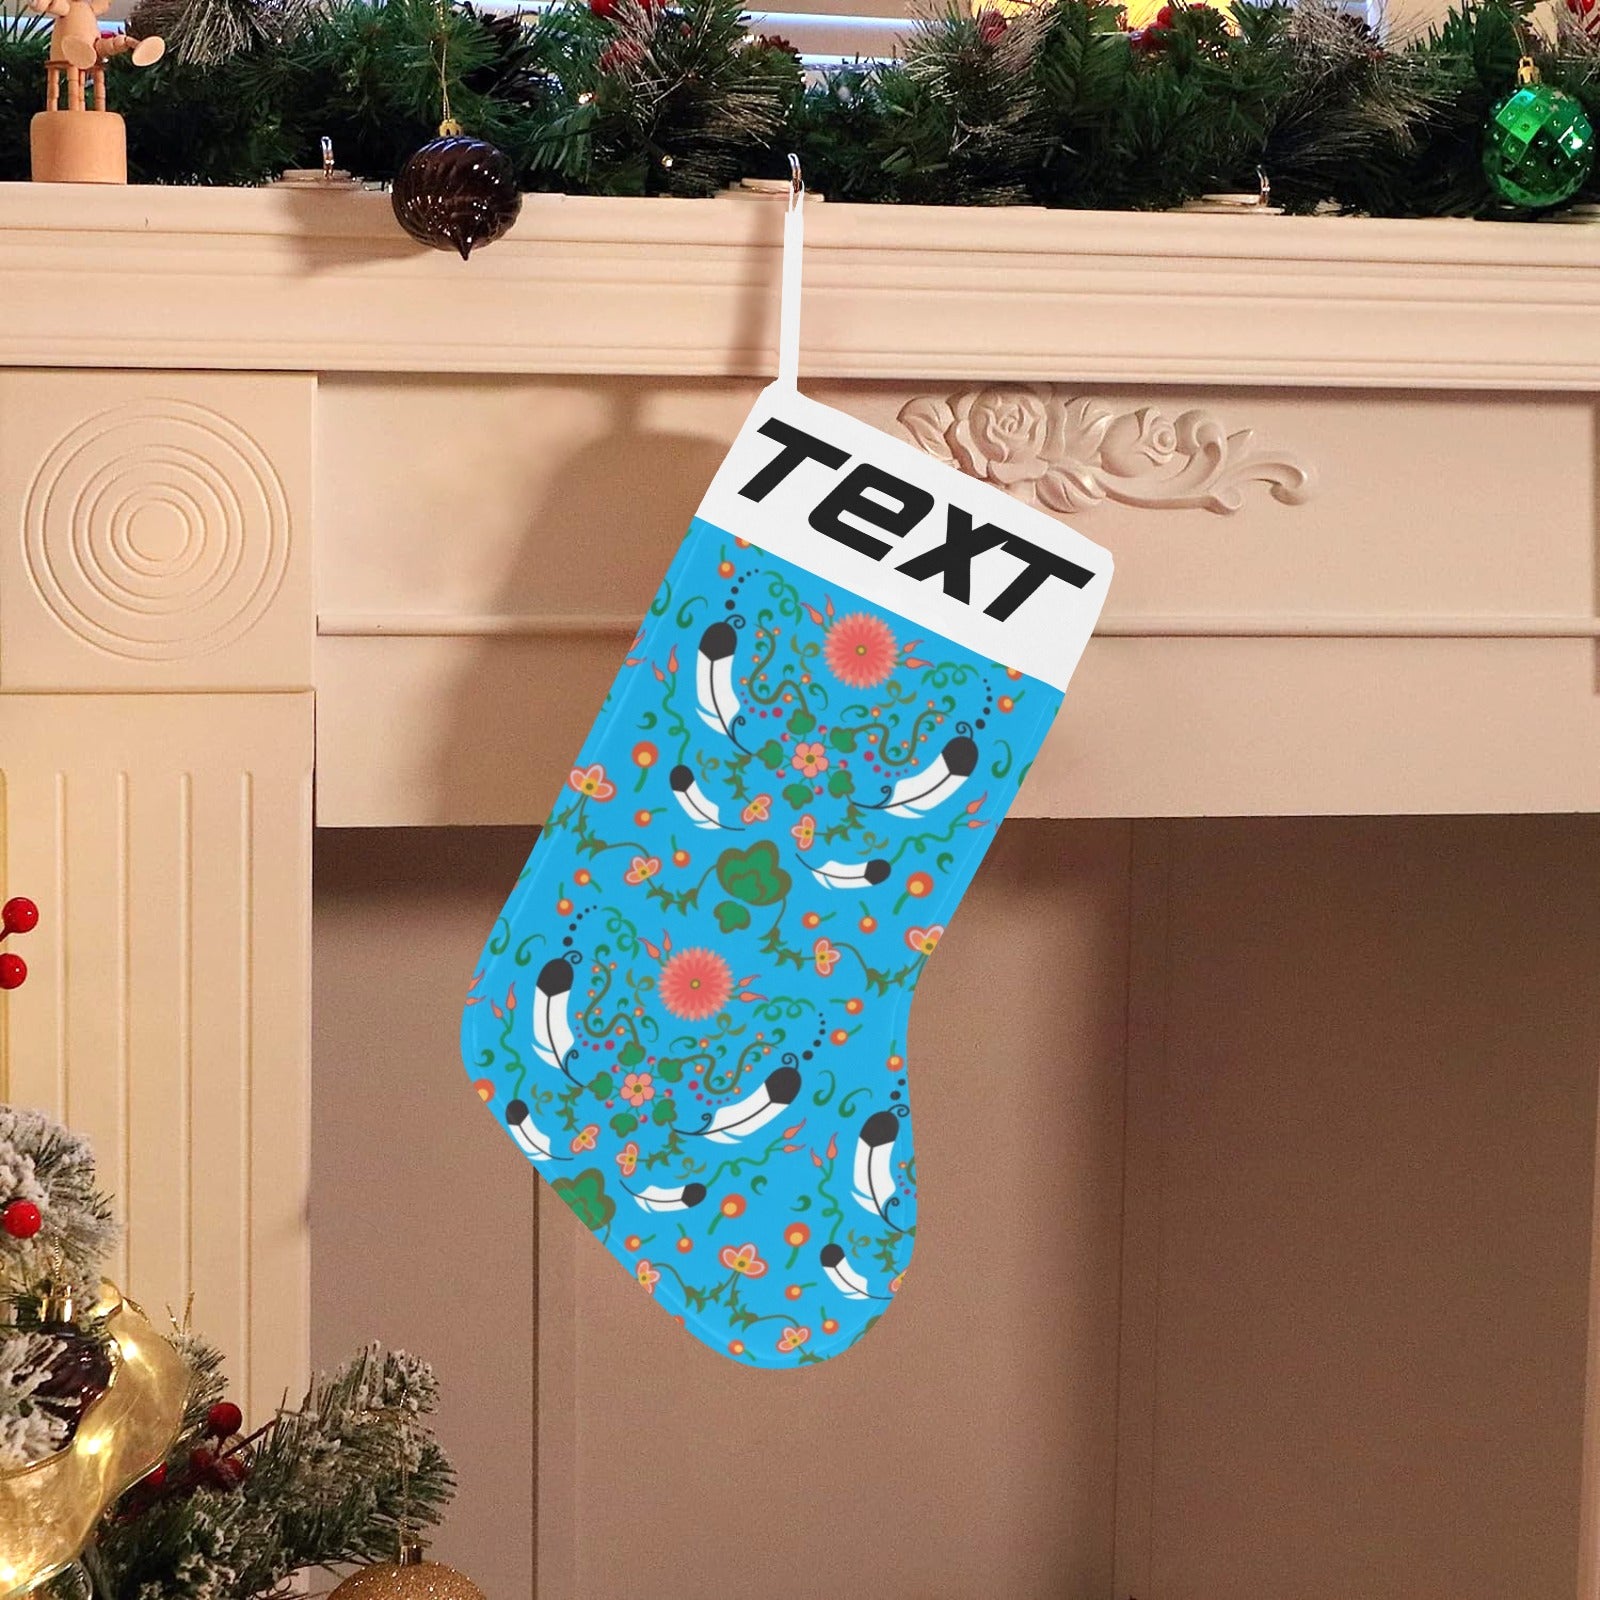 New Growth Bright Sky Christmas Stocking (Custom Text on The Top)